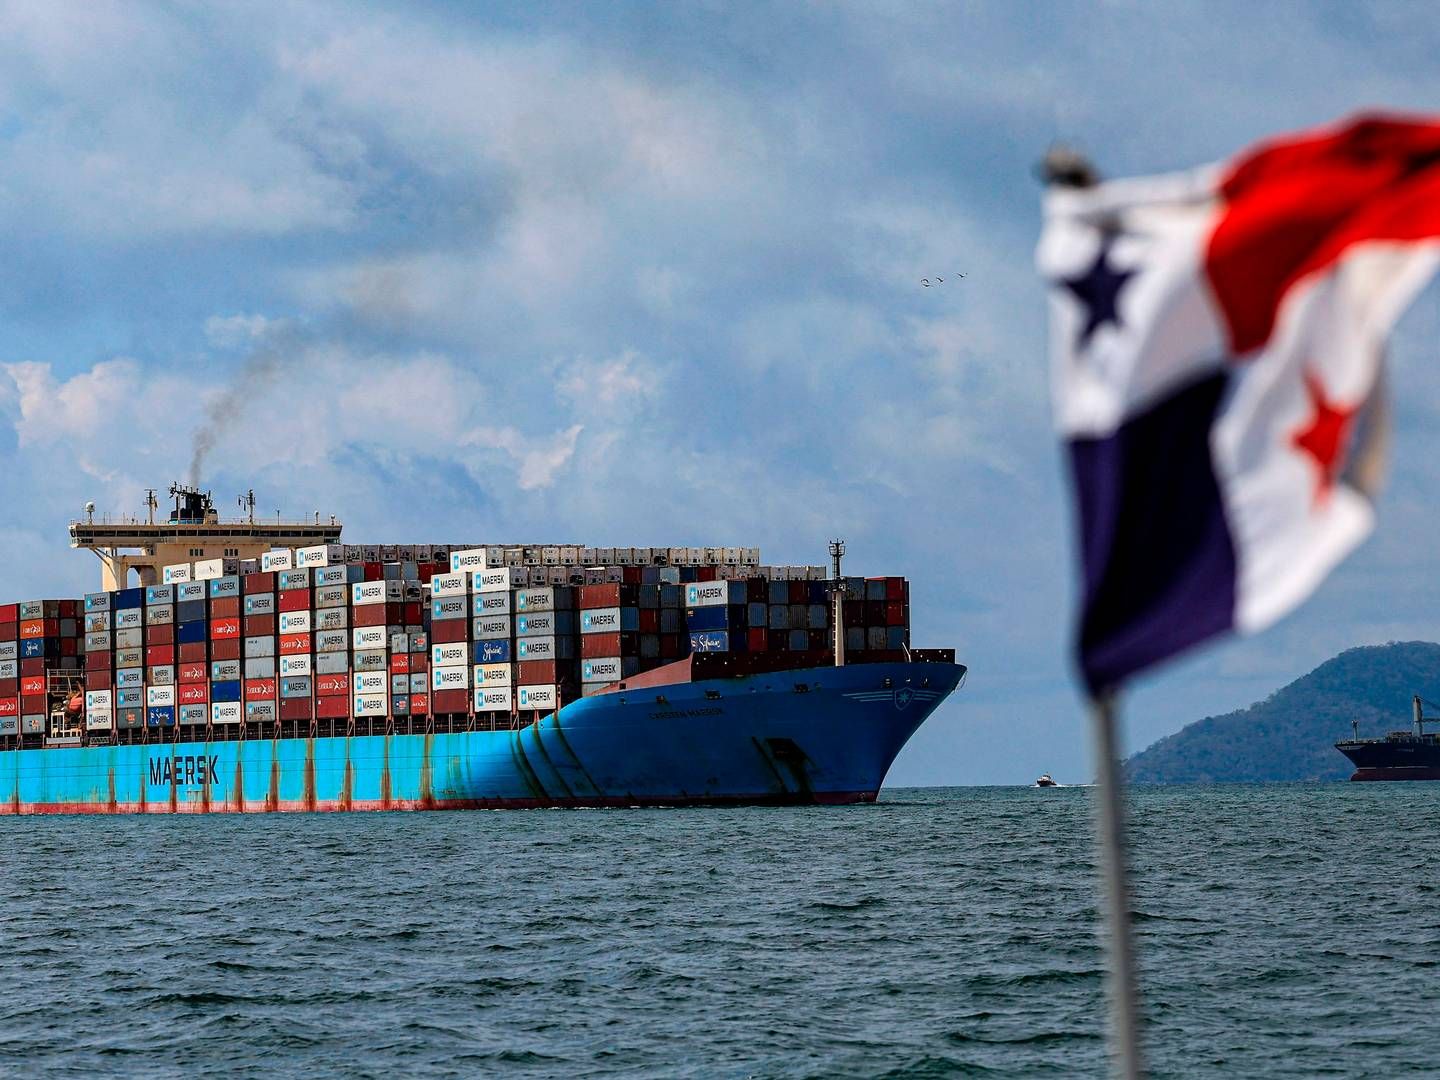 24 ships are scheduled to sail through the canal daily between May 7 and 15. After that, the number will be increased to 31 on May 16. | Foto: Martin Bernetti/AFP/Ritzau Scanpix